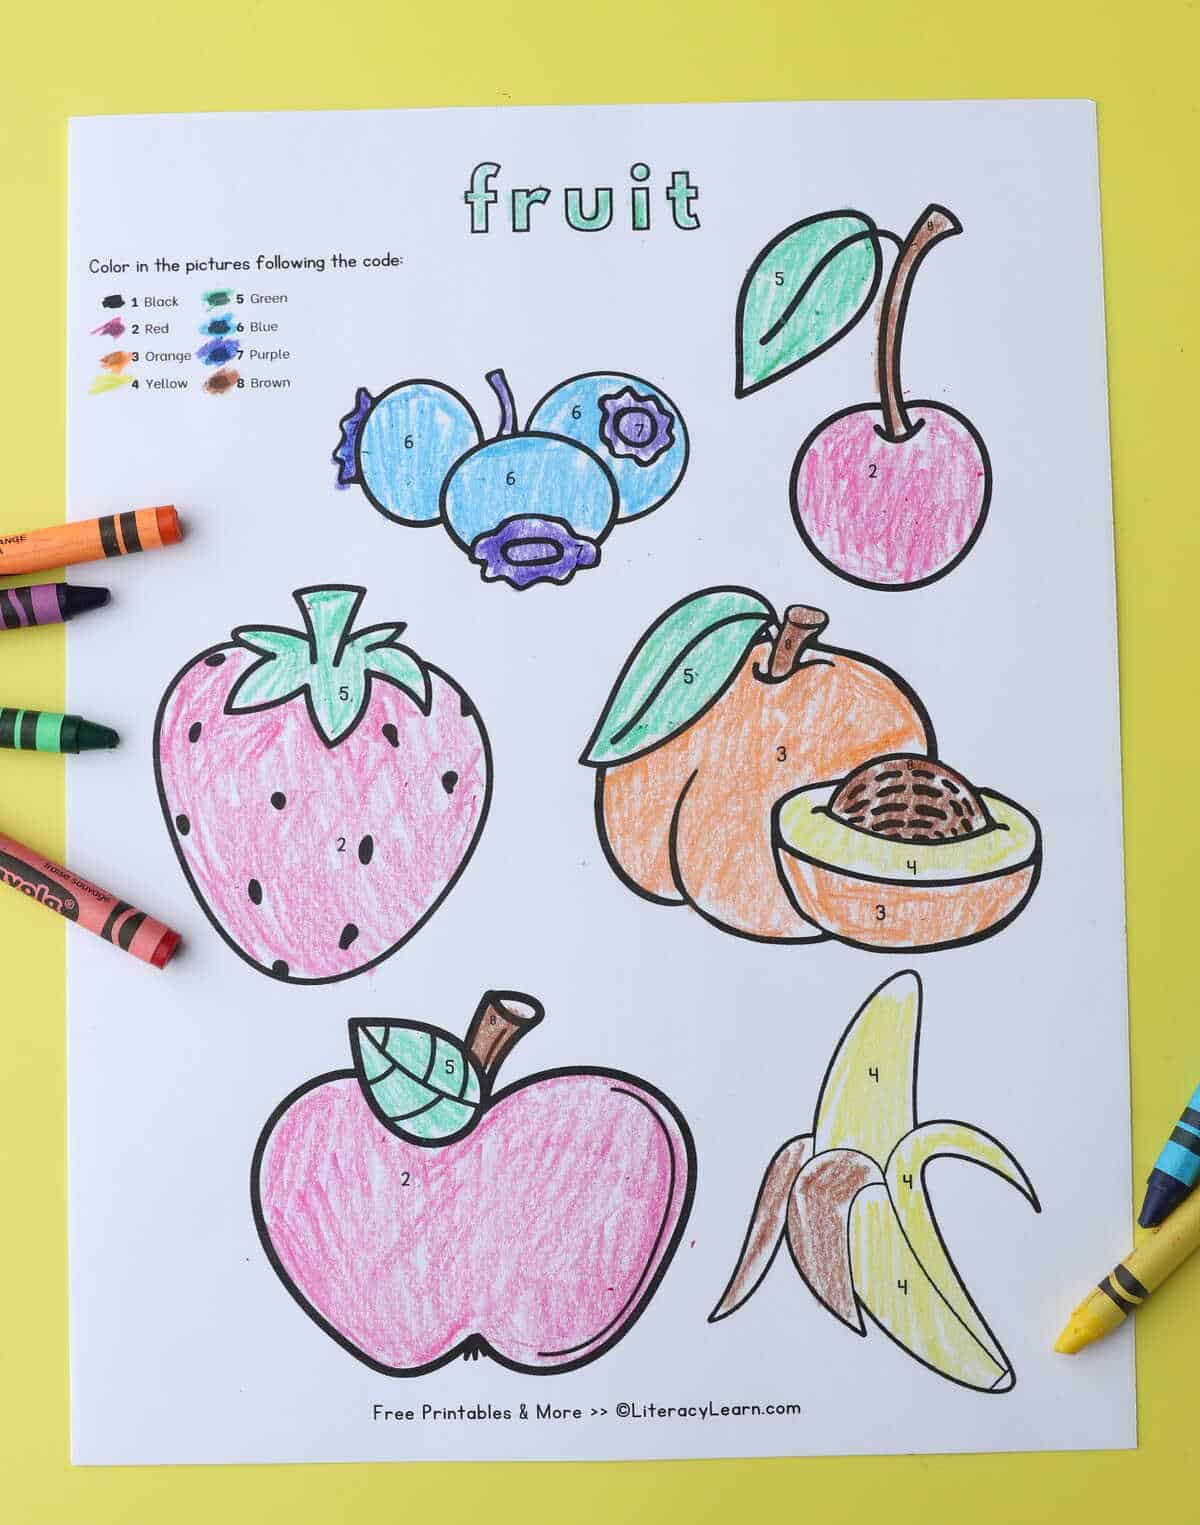 A printed fruit category coloring page with cherries, peach, banana, apple, blueberry, and strawberry. 